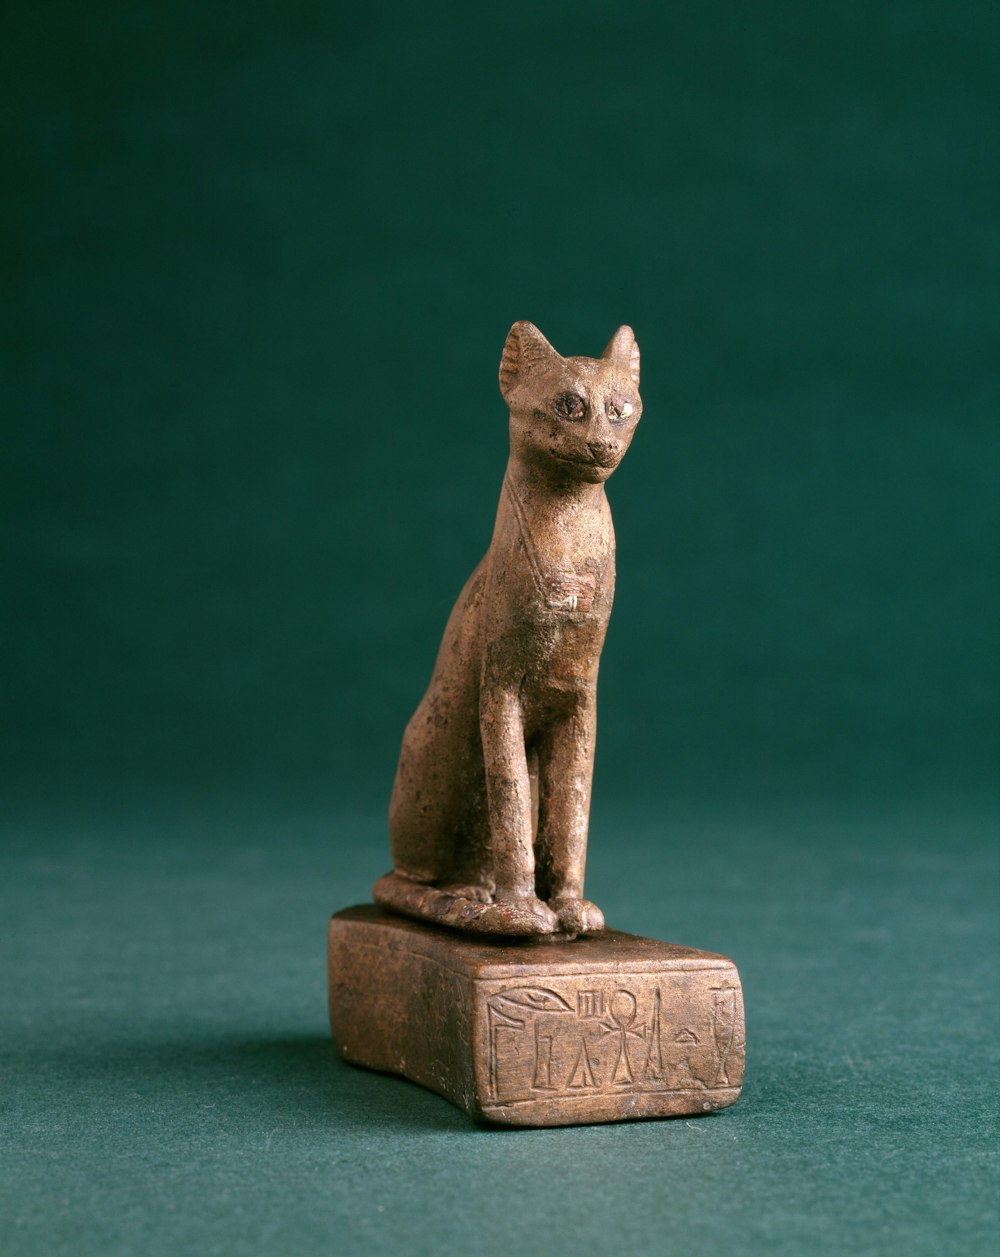 a statue of a cat sitting on top of a wooden block